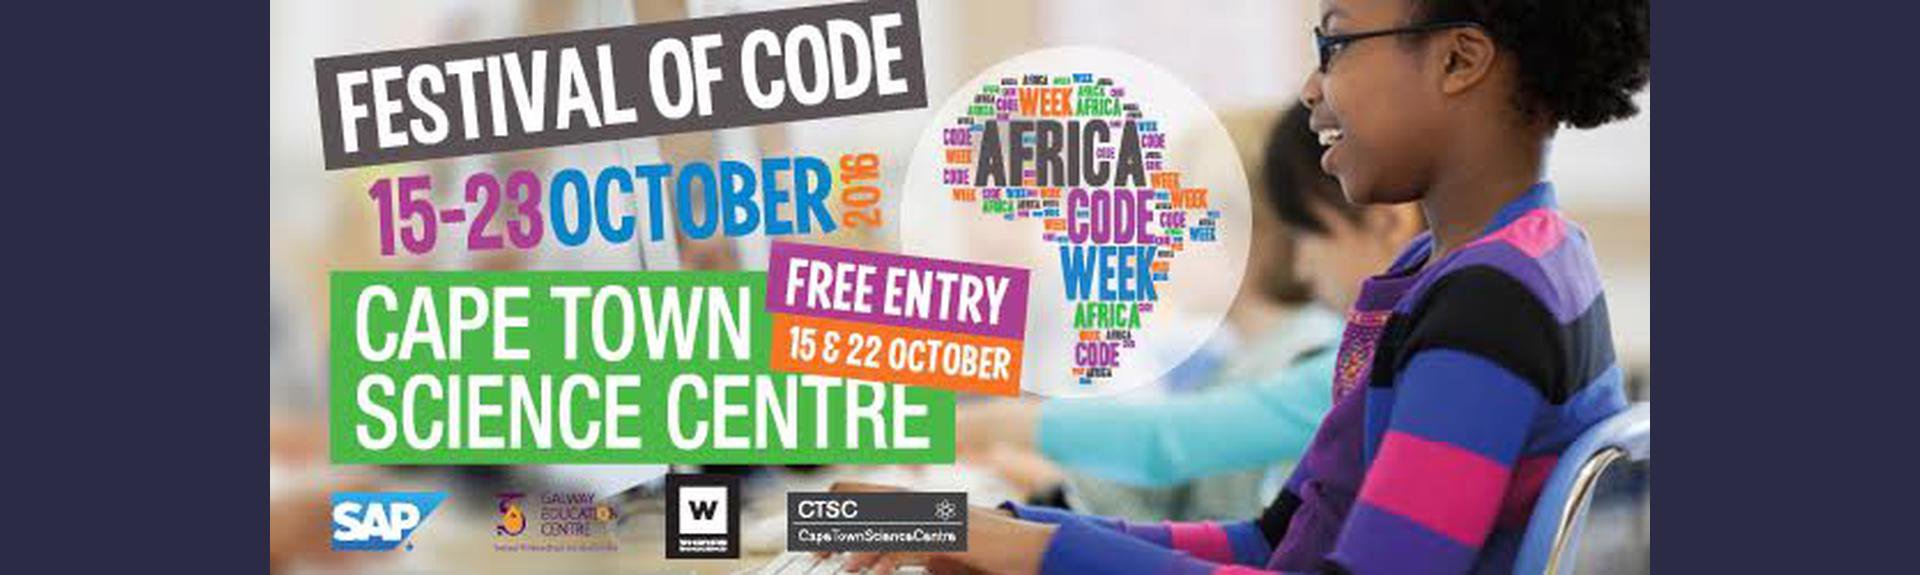 Africa Code Week is here – Free Festival of Code days on 15 and 22 October